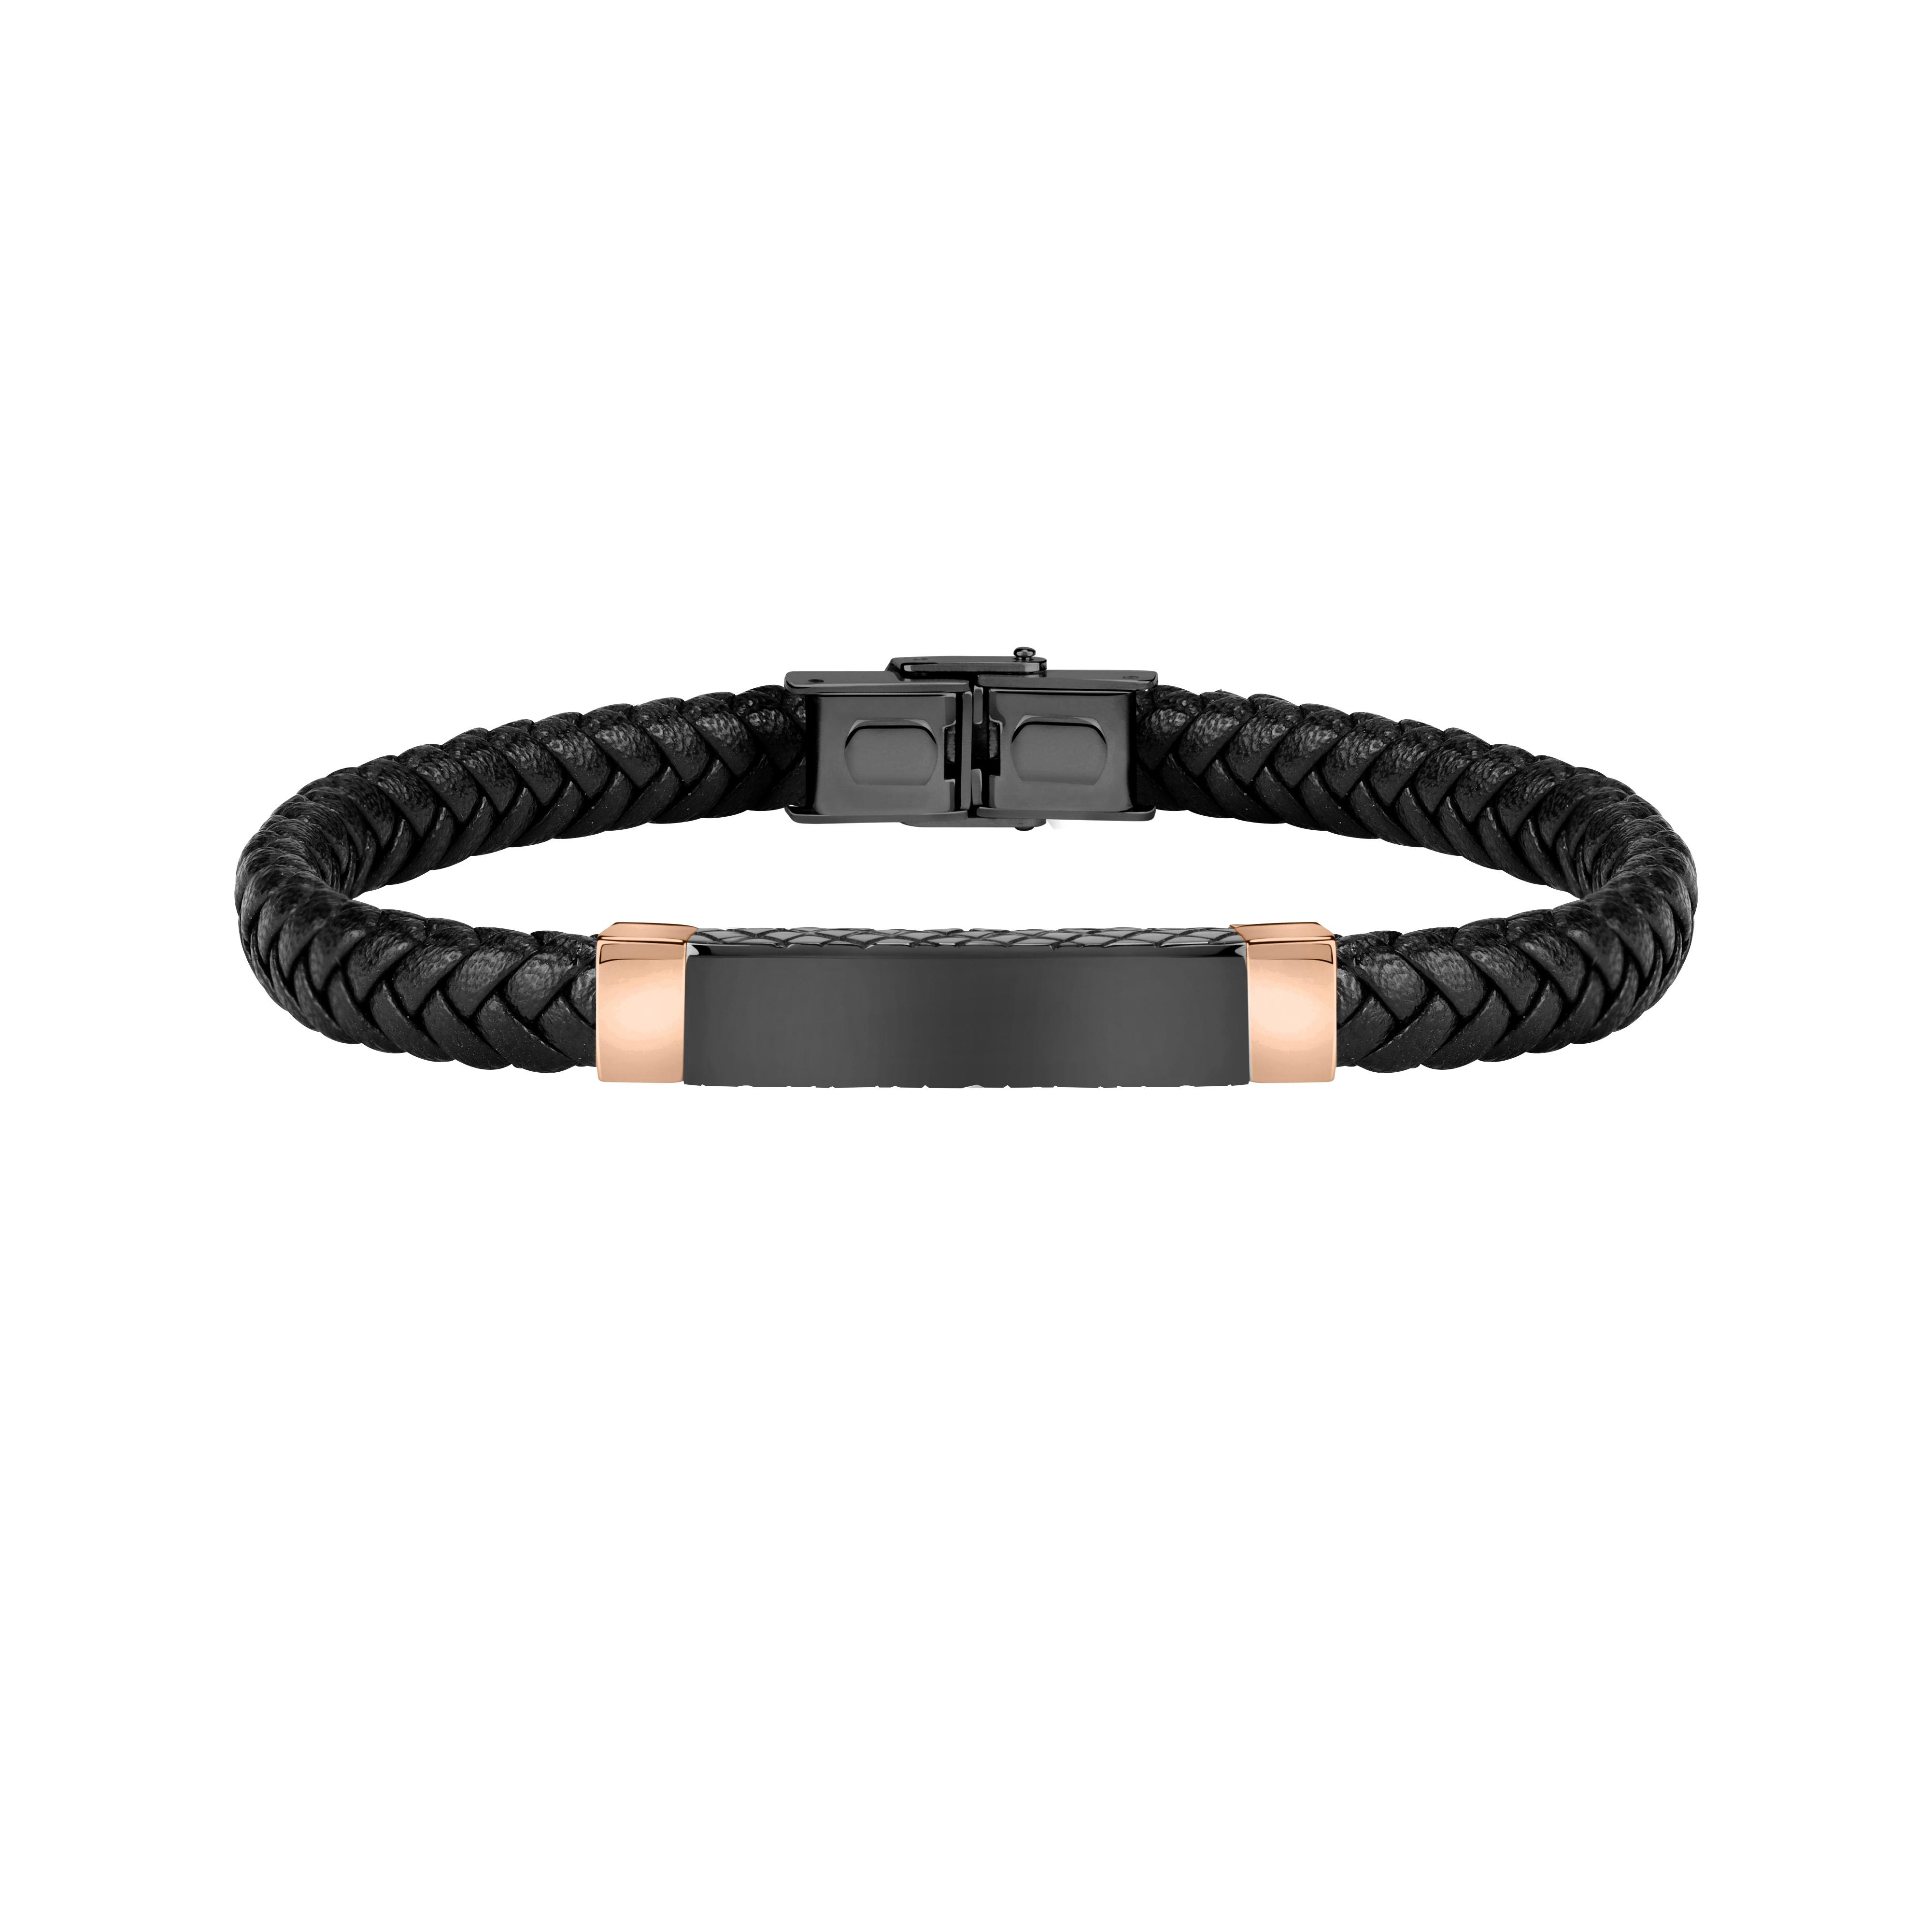 Sector leather steel bracelet Jewelry: collection SZV52 Bandy Man and